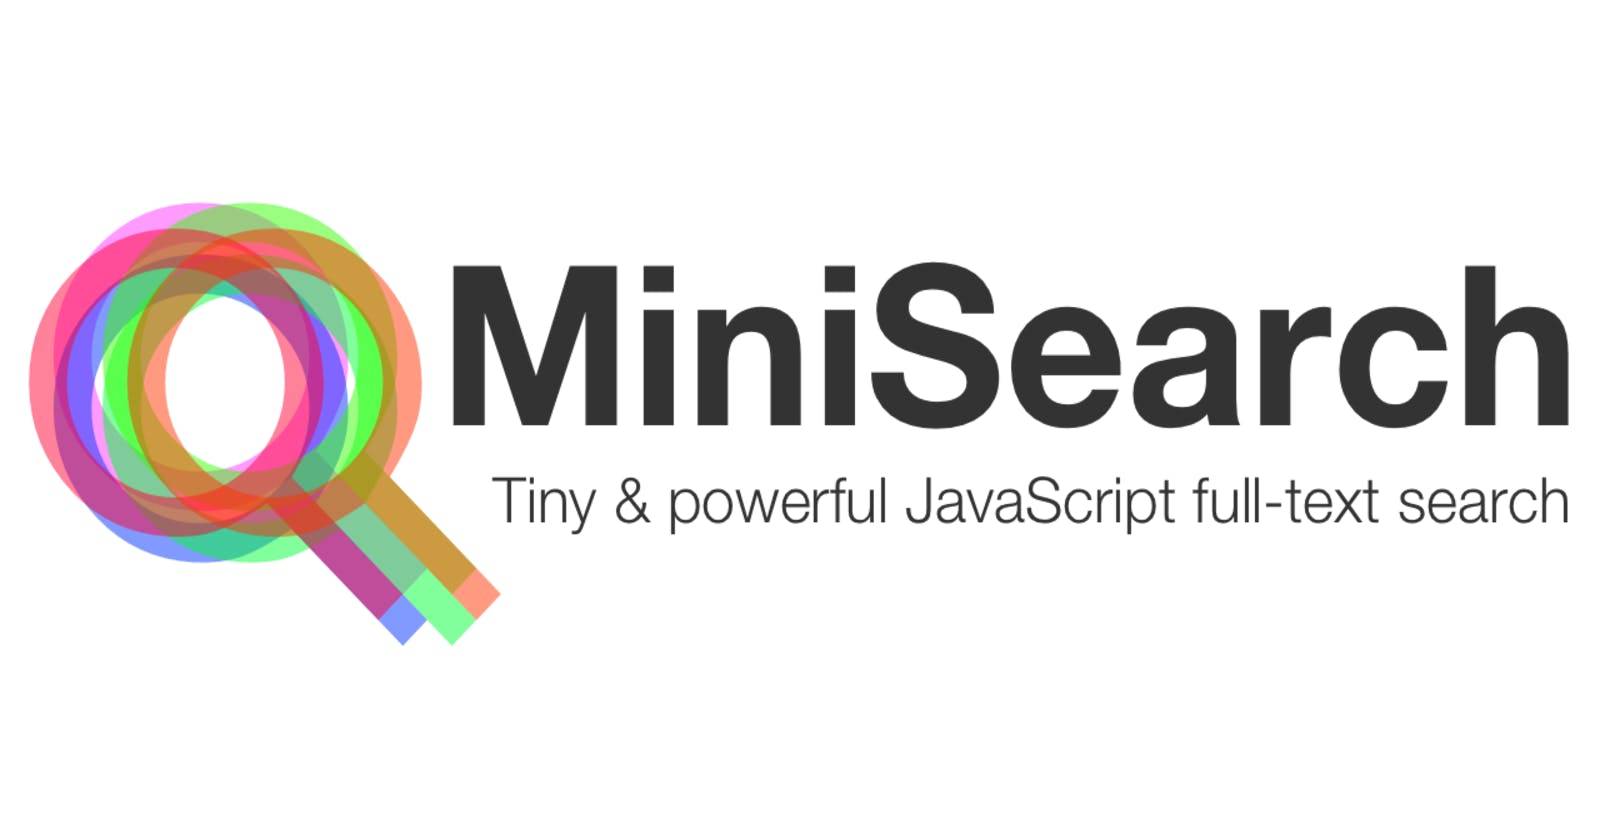 Transitioning from Lunr.js to Minisearch.js